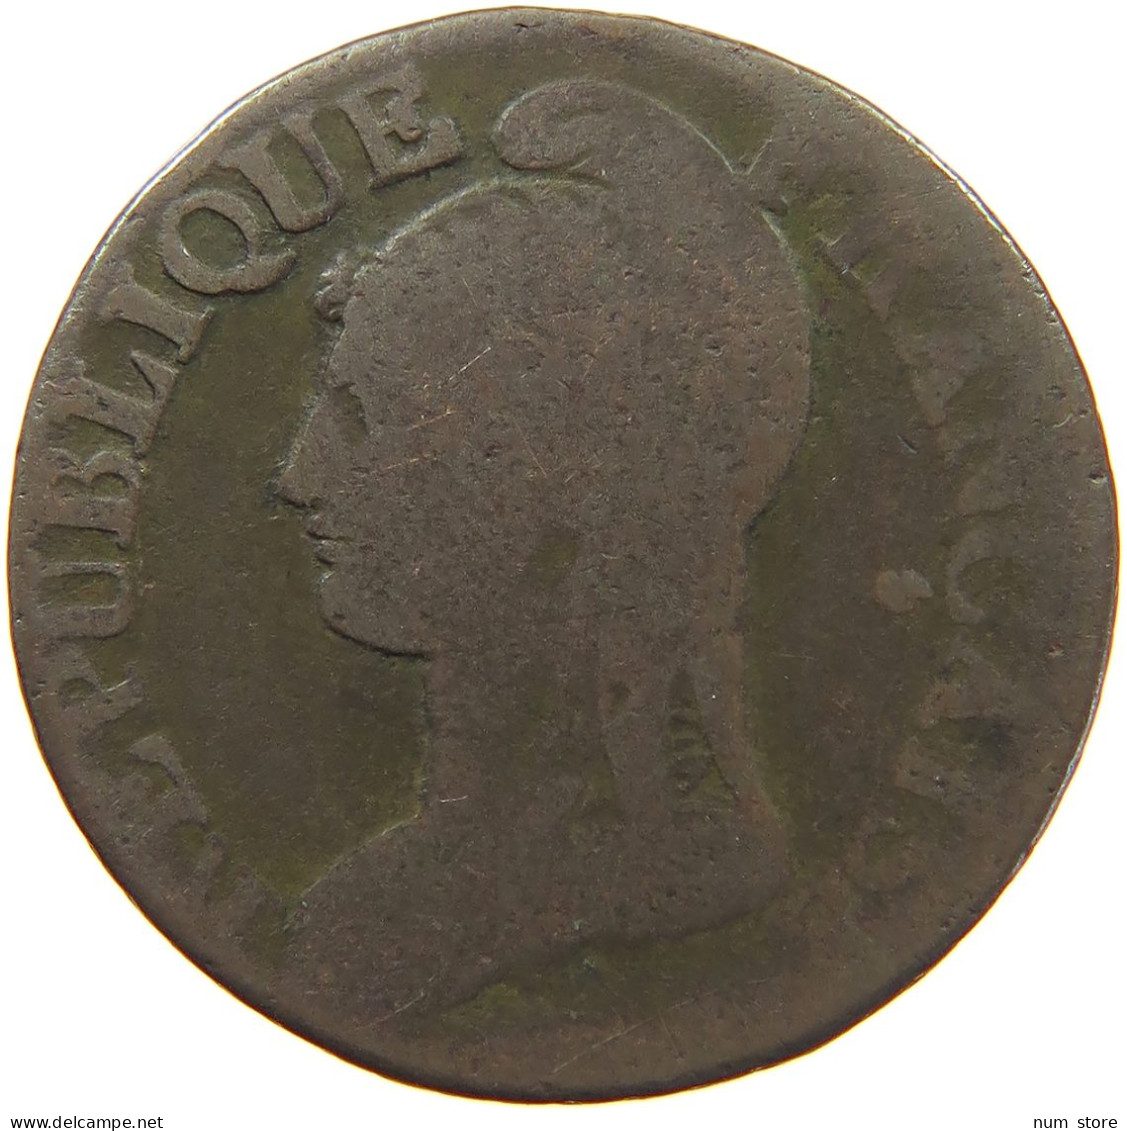 FRANCE 5 CENTIMES AN 8 W  #c032 0515 - 5 Centimes